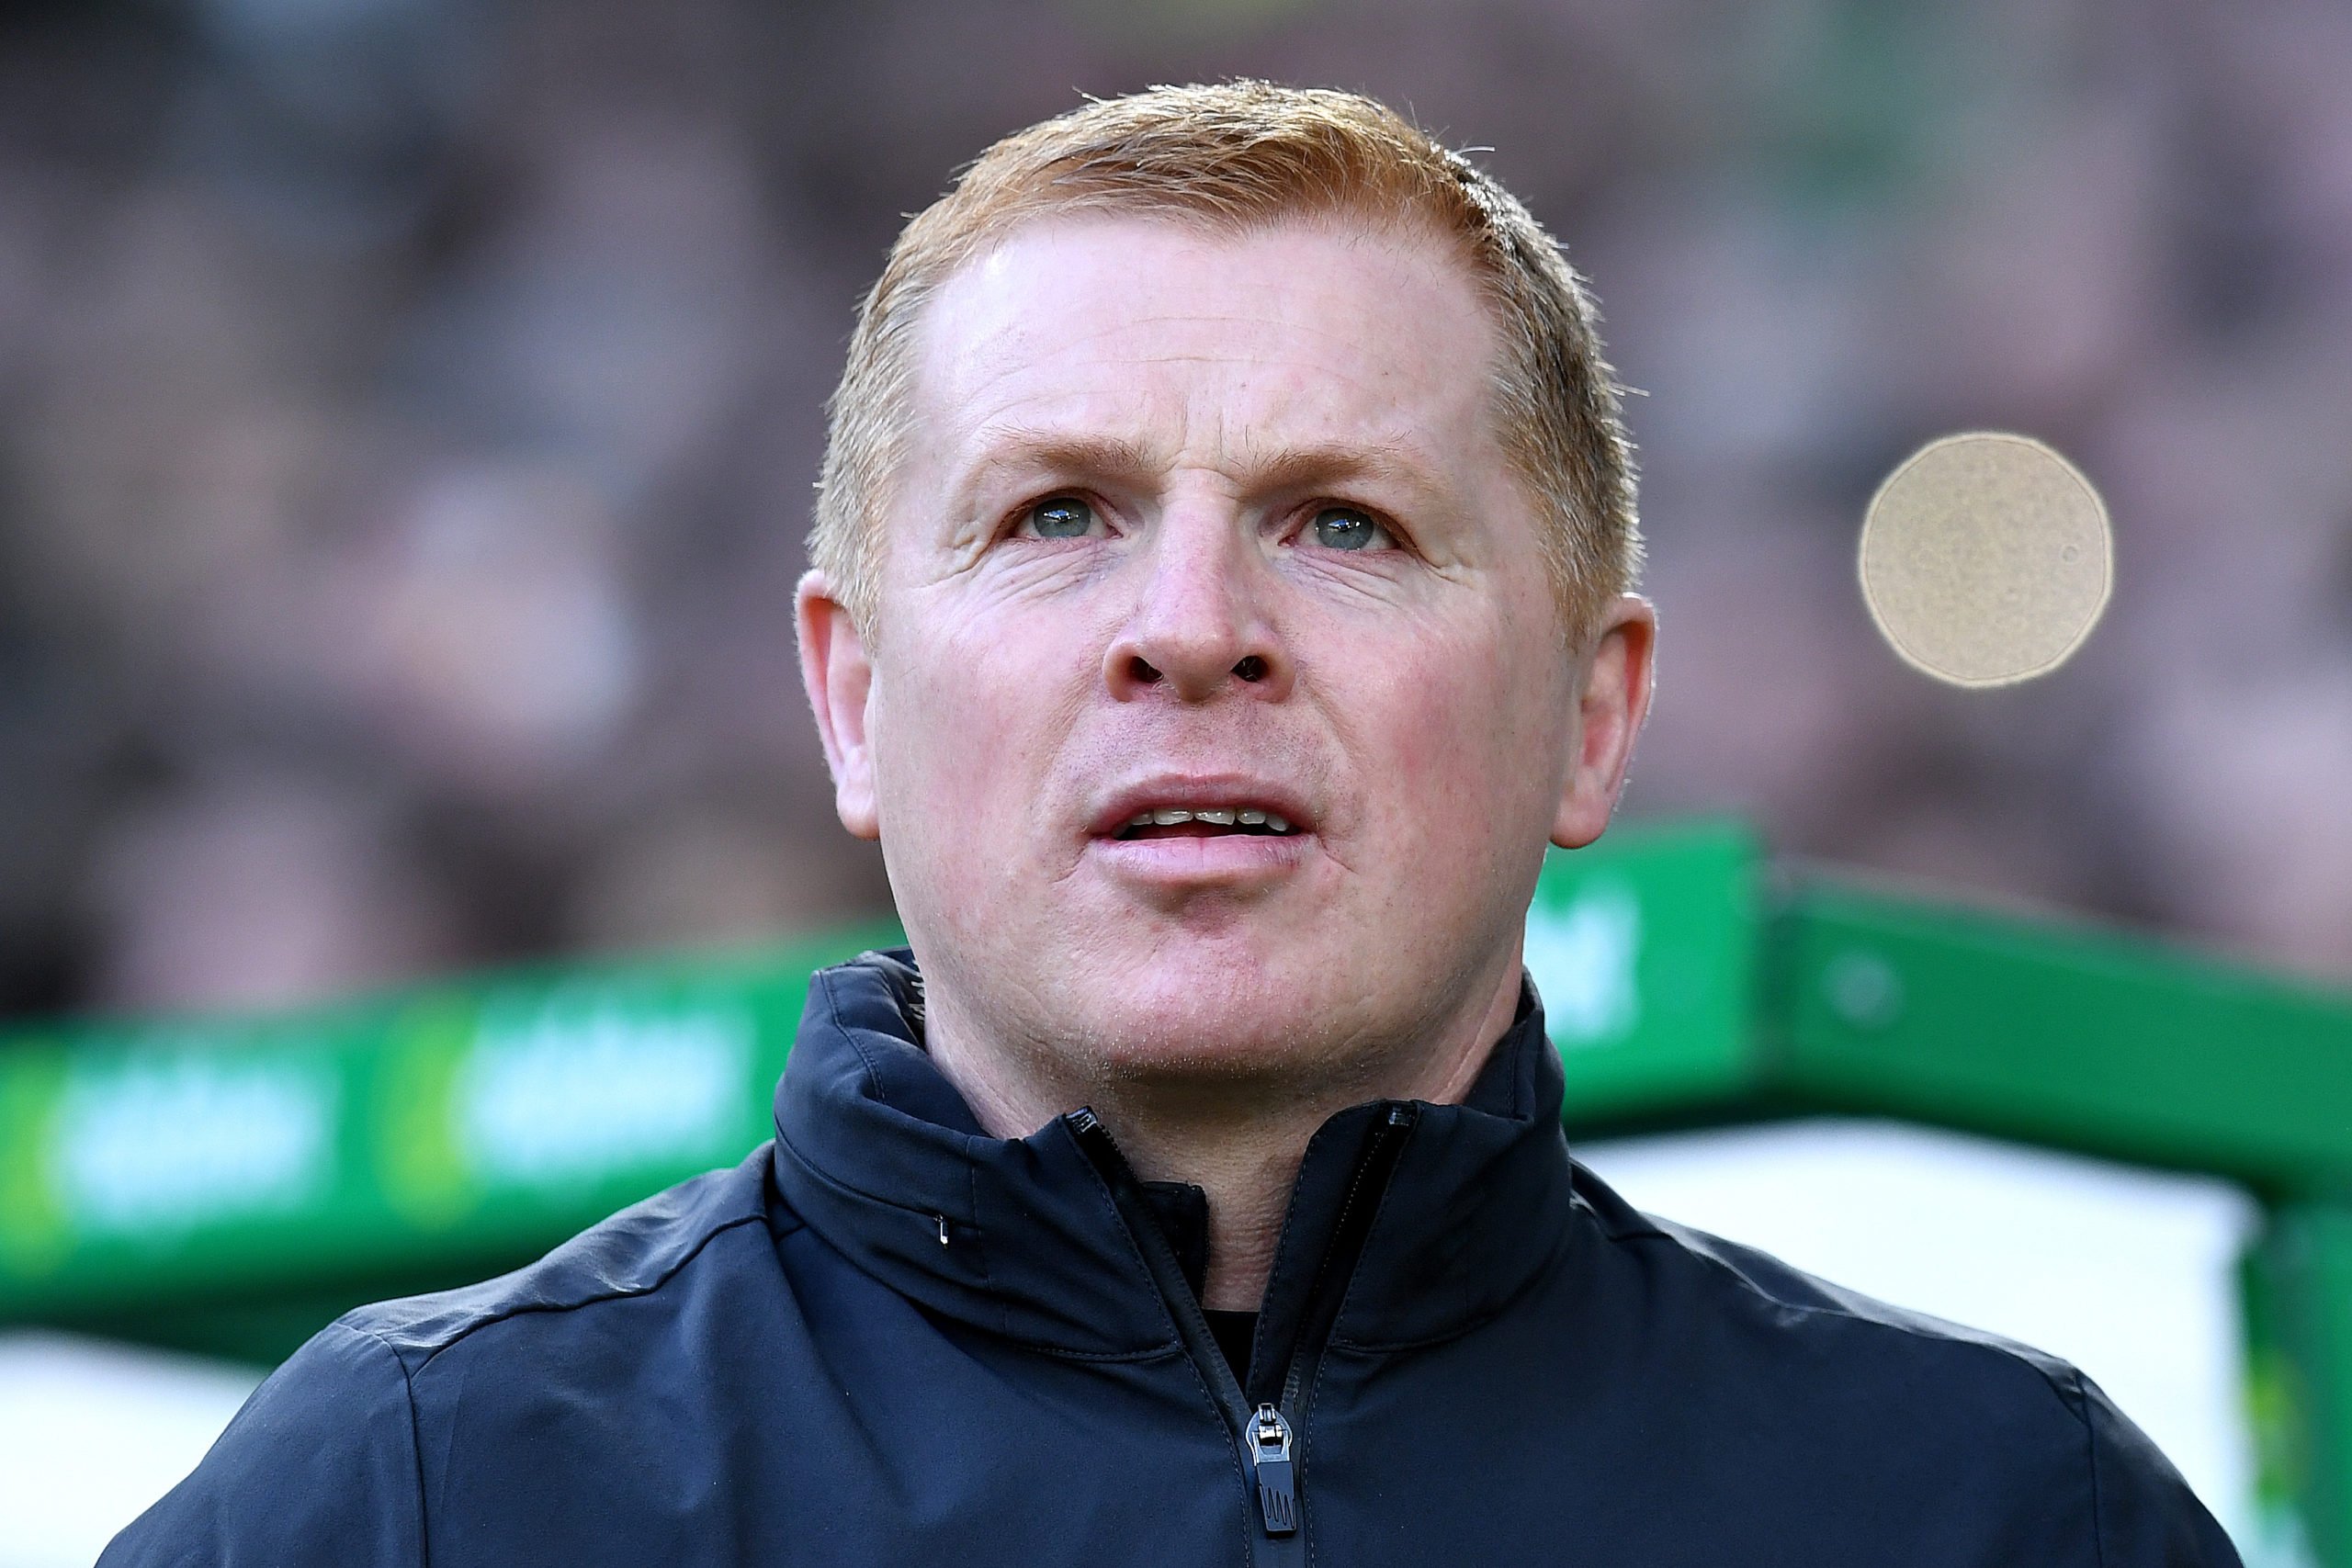 Neil Lennon makes first media appearance since Celtic exit live on radio